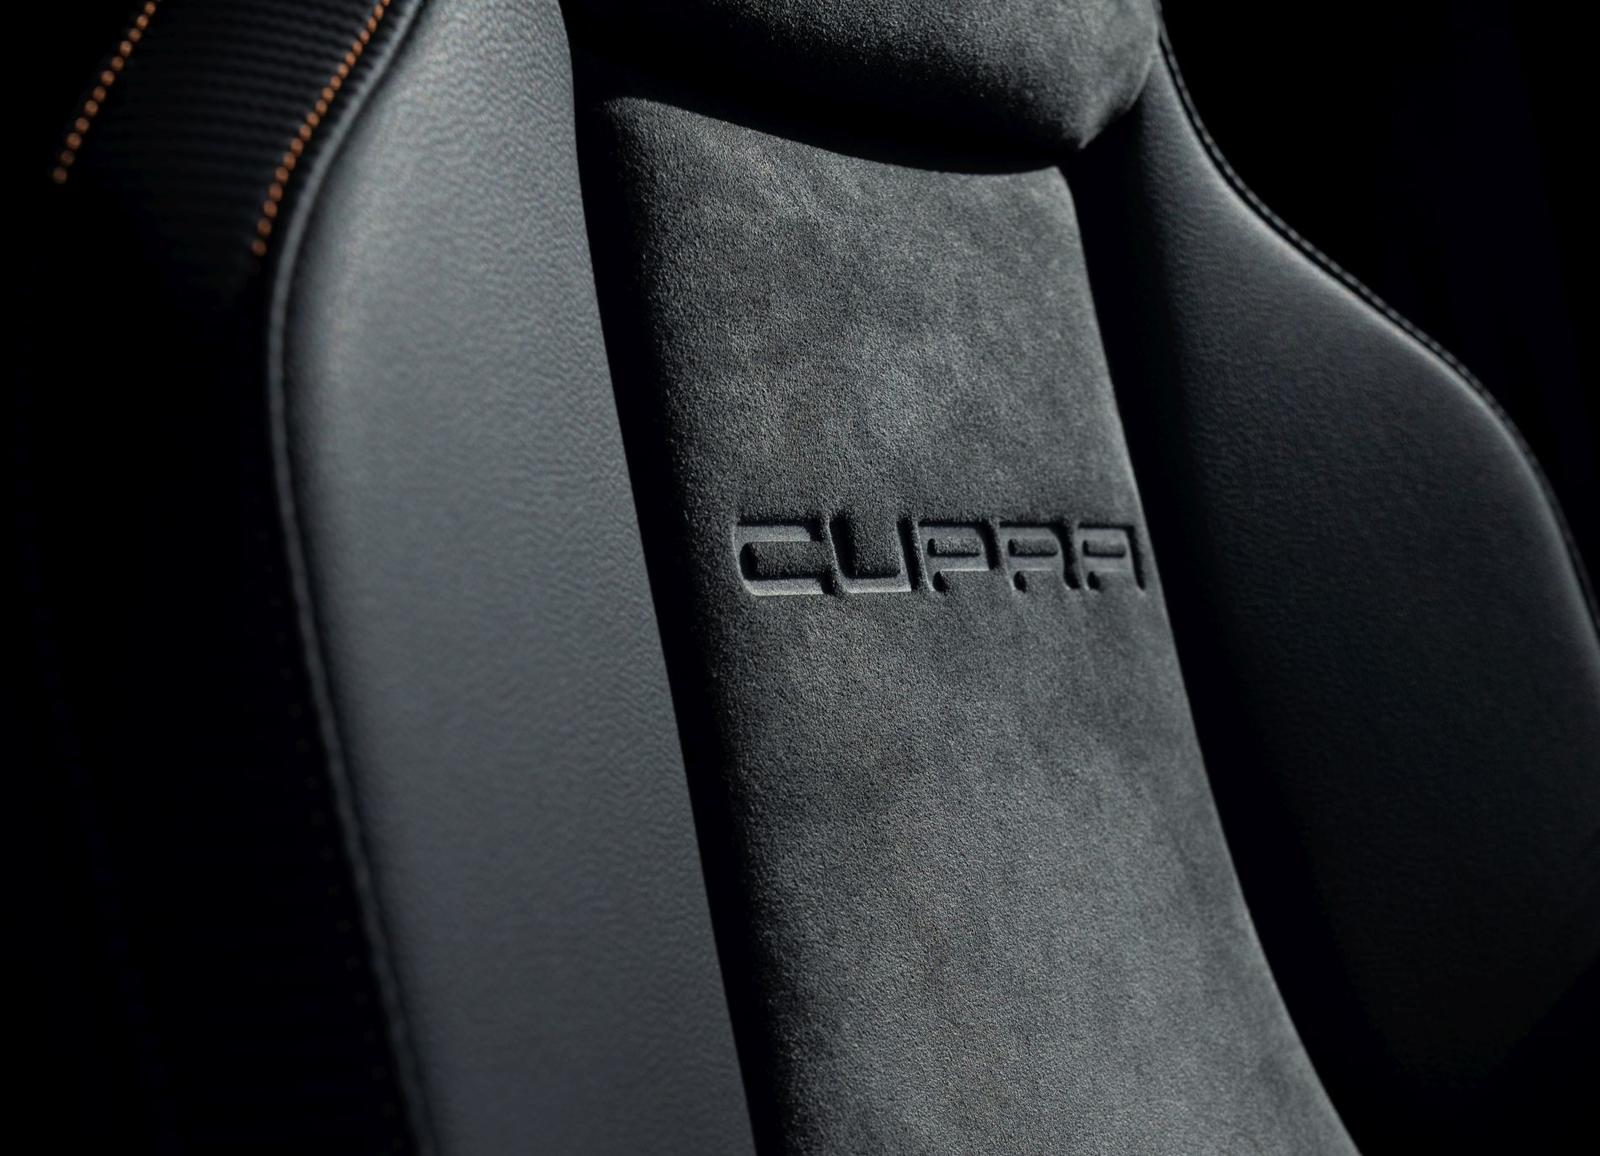 Leon-CUPRA-R-ST-brings-new-levels-of-uniqueness-sophistication-and-performance_01_HQ